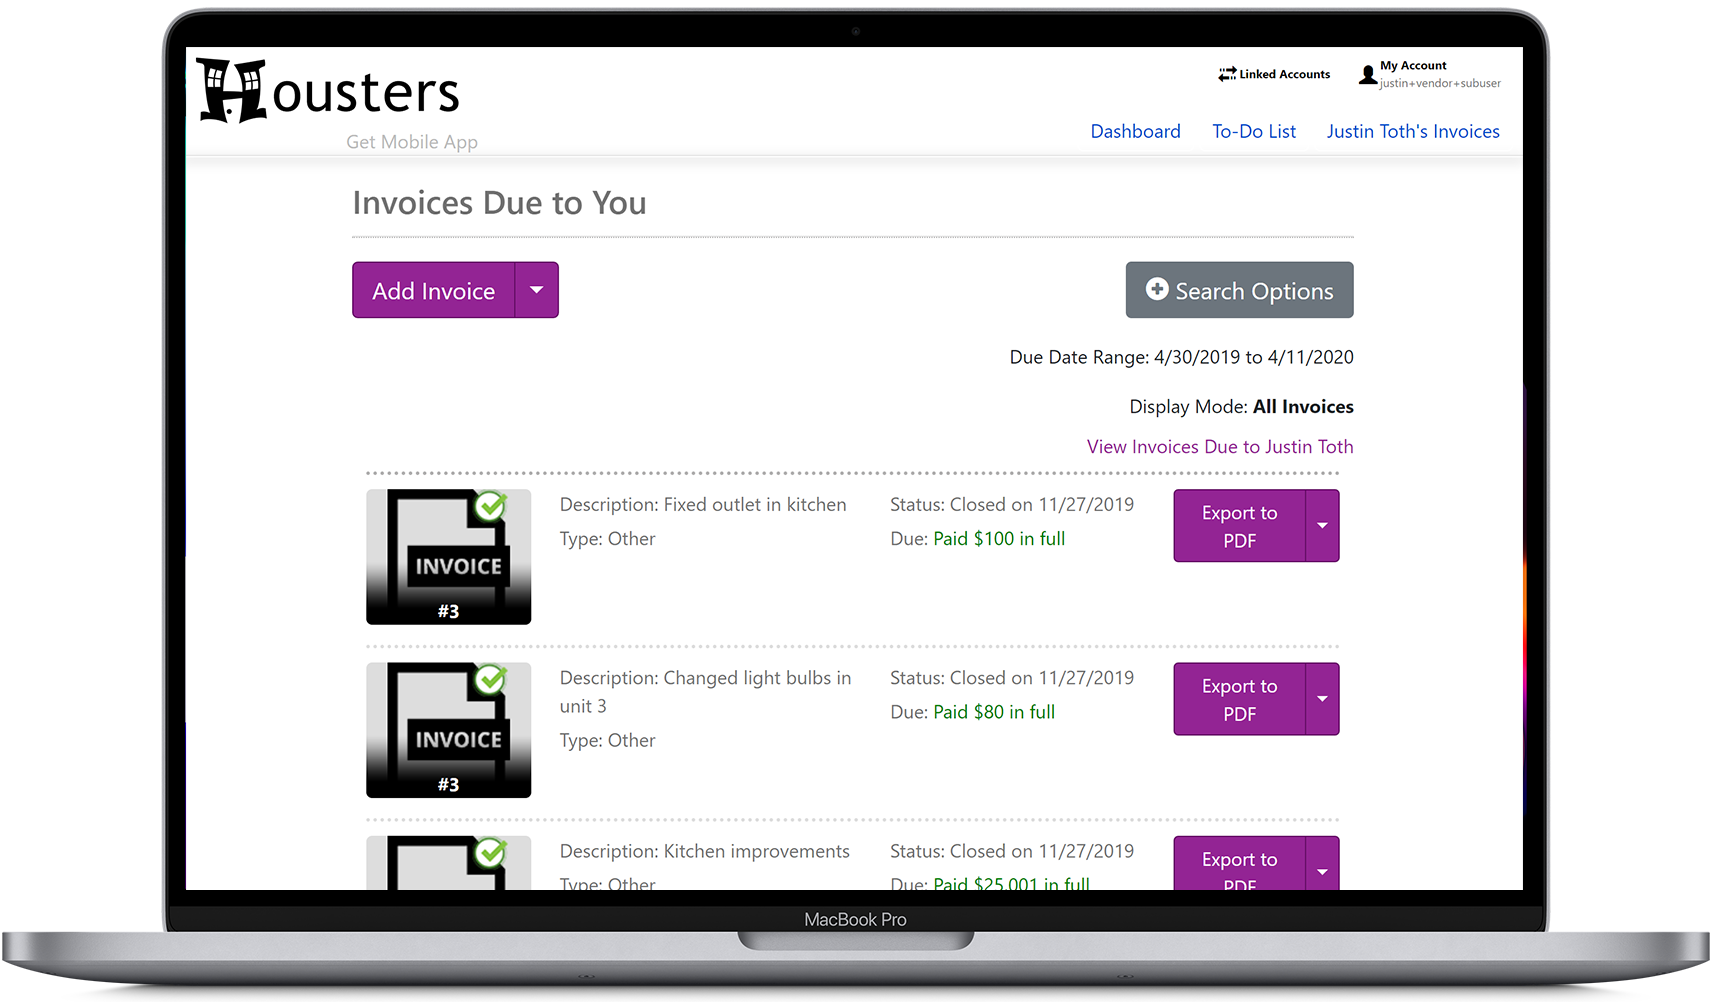 Contractors can create and send invoices to landlords and property managers